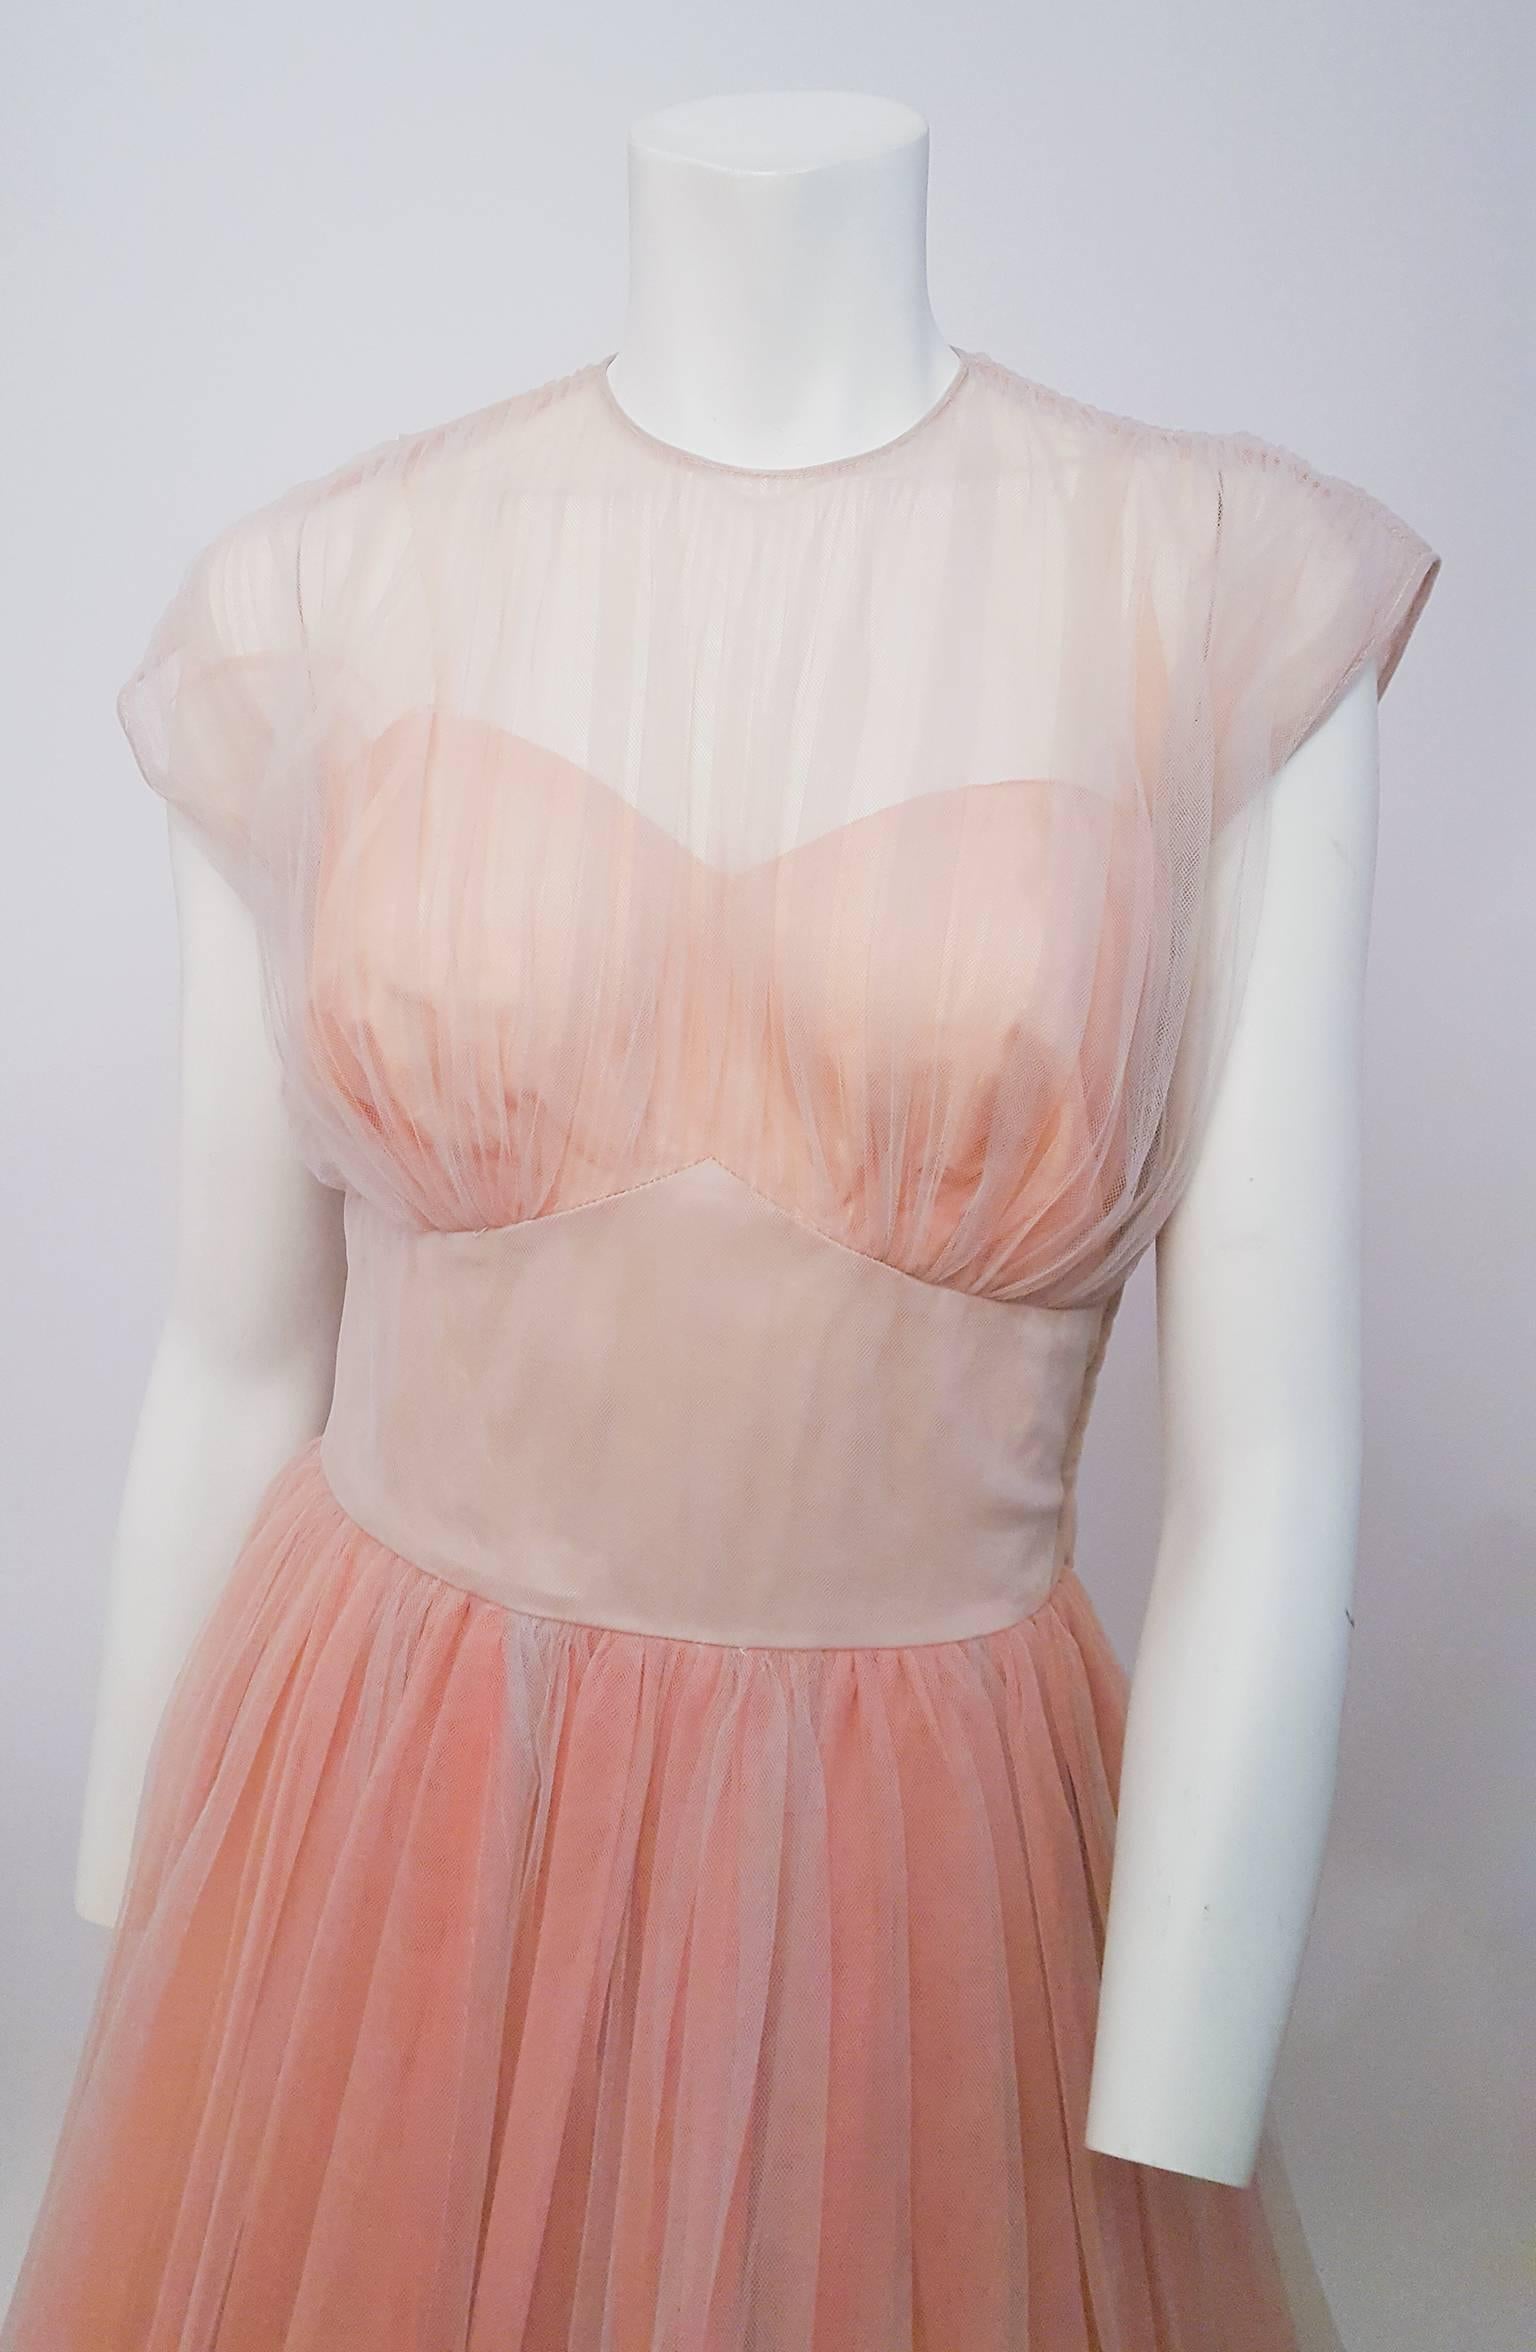 50s Pastel Pink and Blue Cocktail Dress w/ Sweetheart Illusion Neckline. Pink and blue tulle layered over peach lining. Side zip closure.